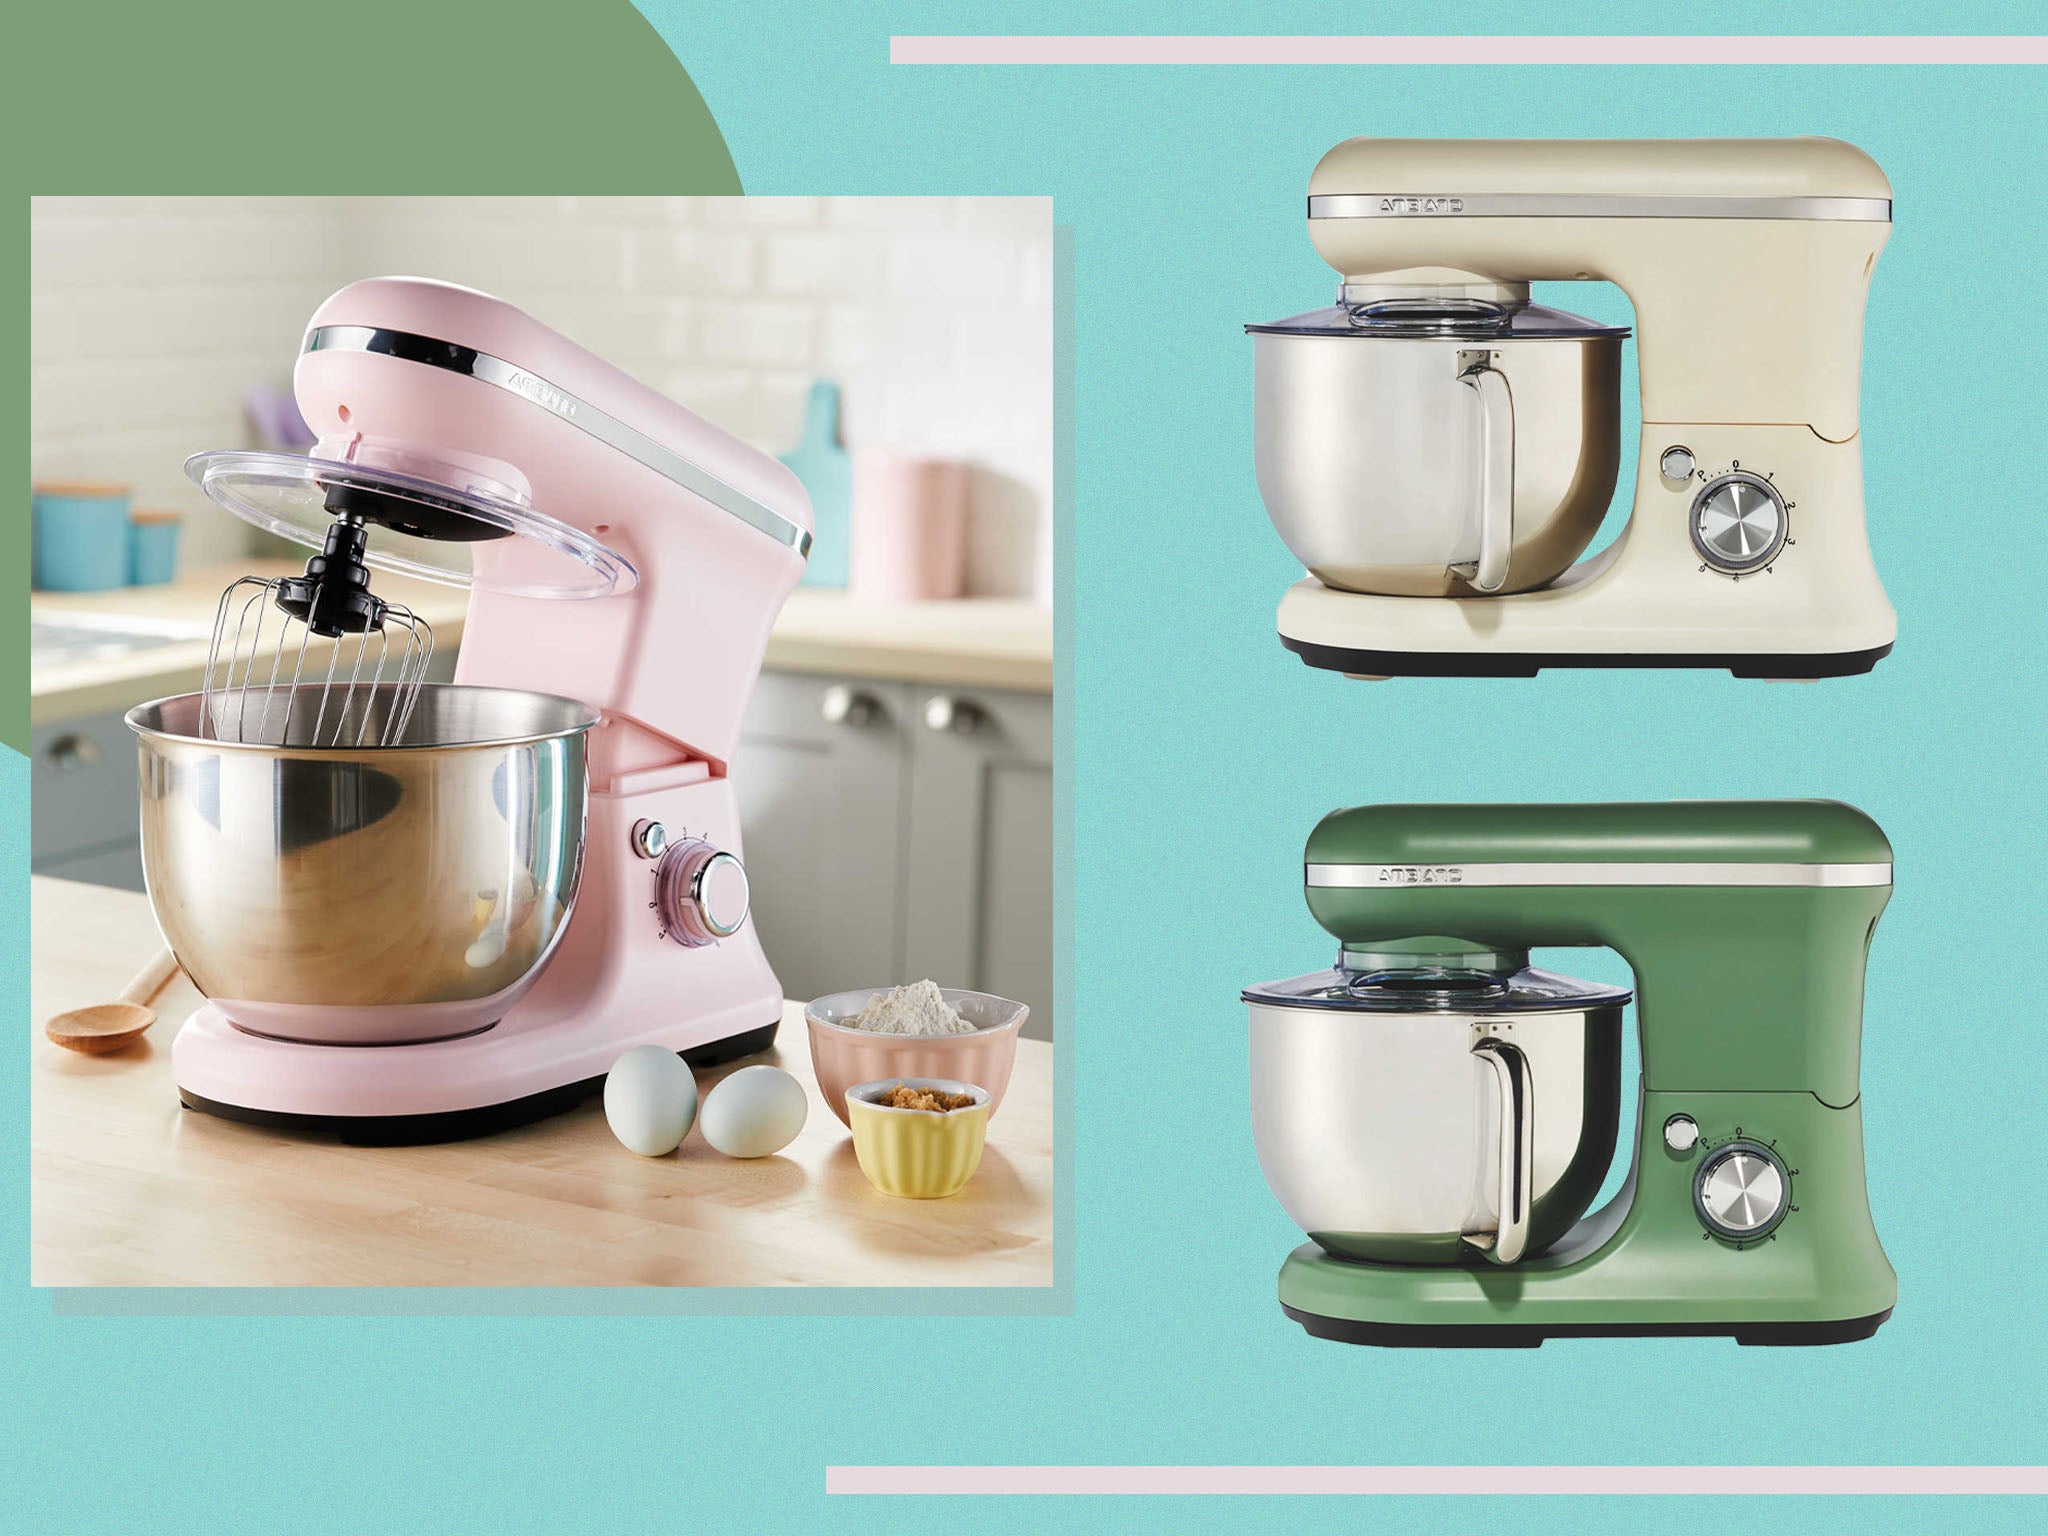 The baking buy arrives just in time for The Great British Bake Off returning to our screens